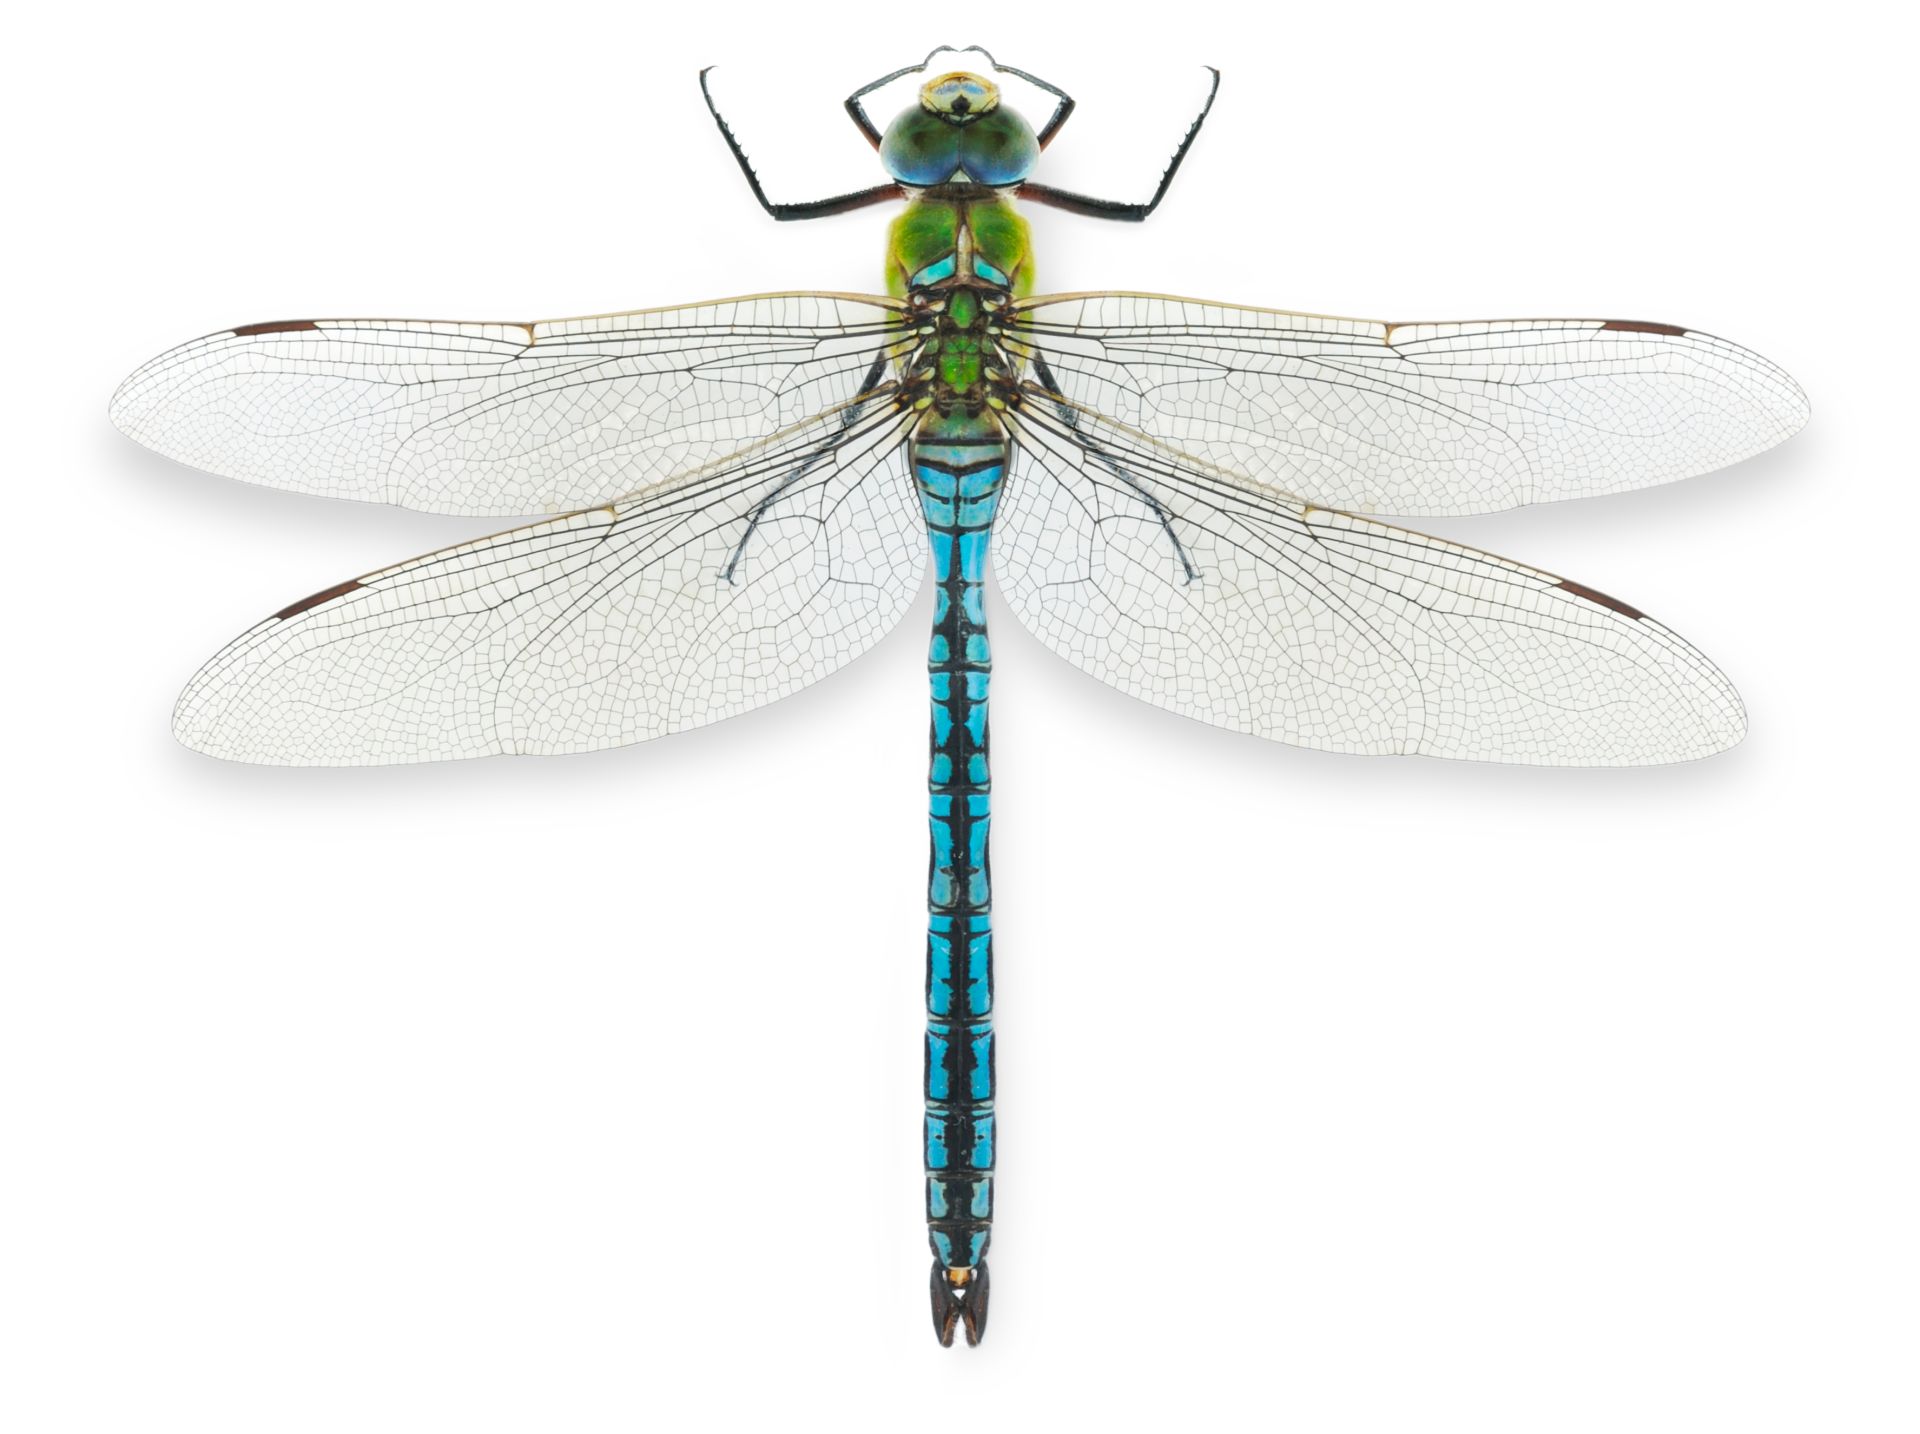 Emperor Dragonfly Facts | Dragonflies For Kids | DK Find Out